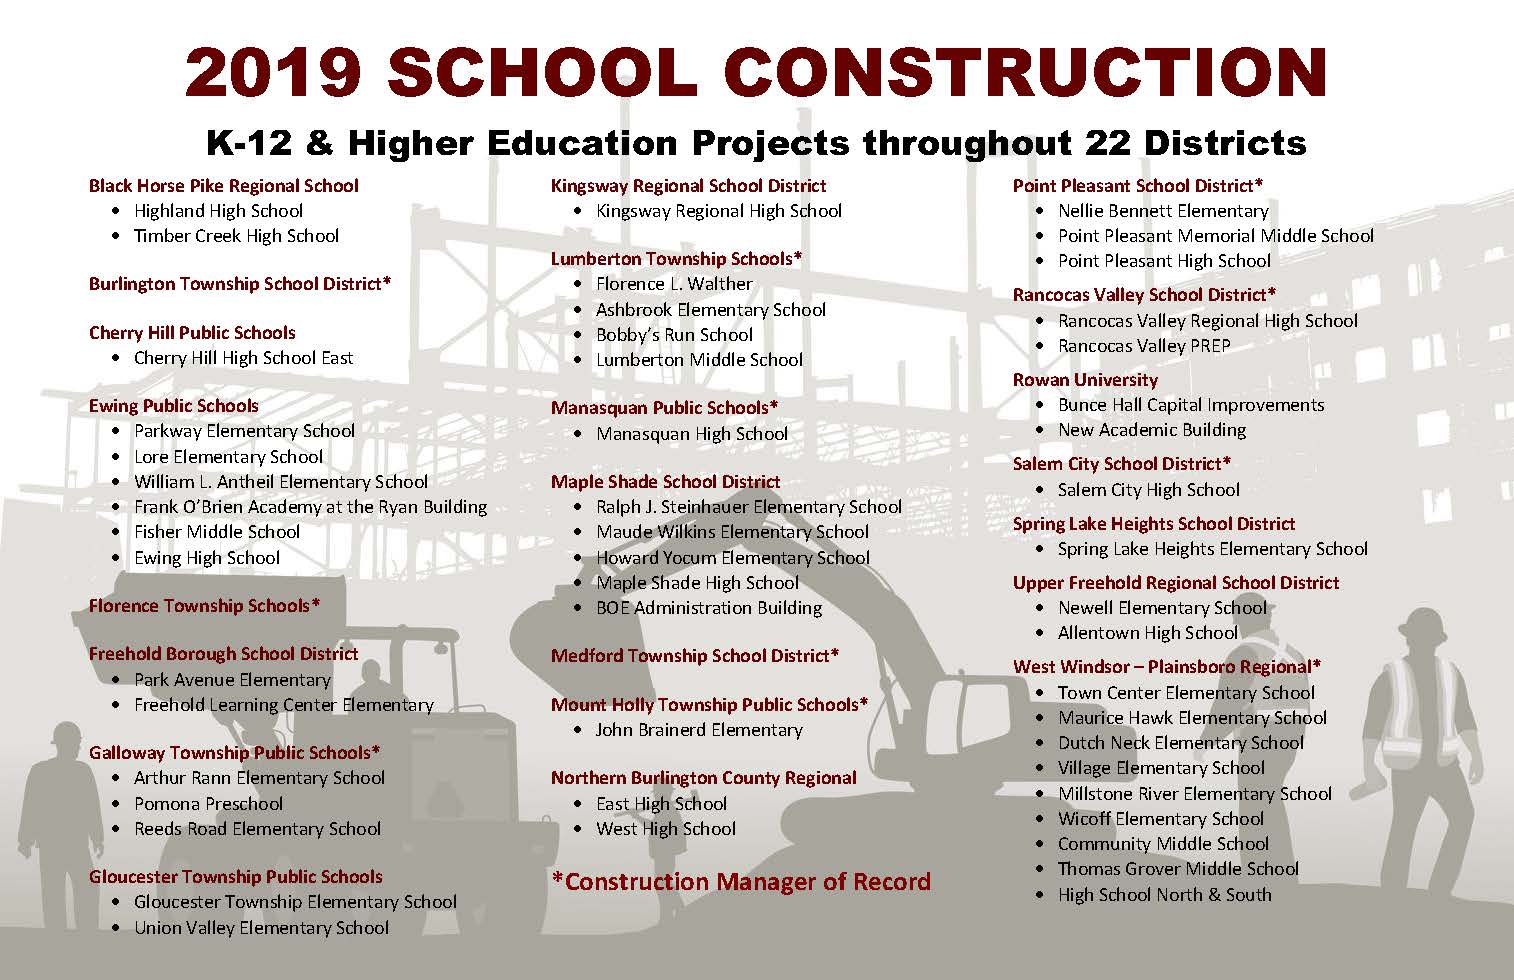 NEW ROAD's 2019 Construction Management work included K-12 and Higher Education